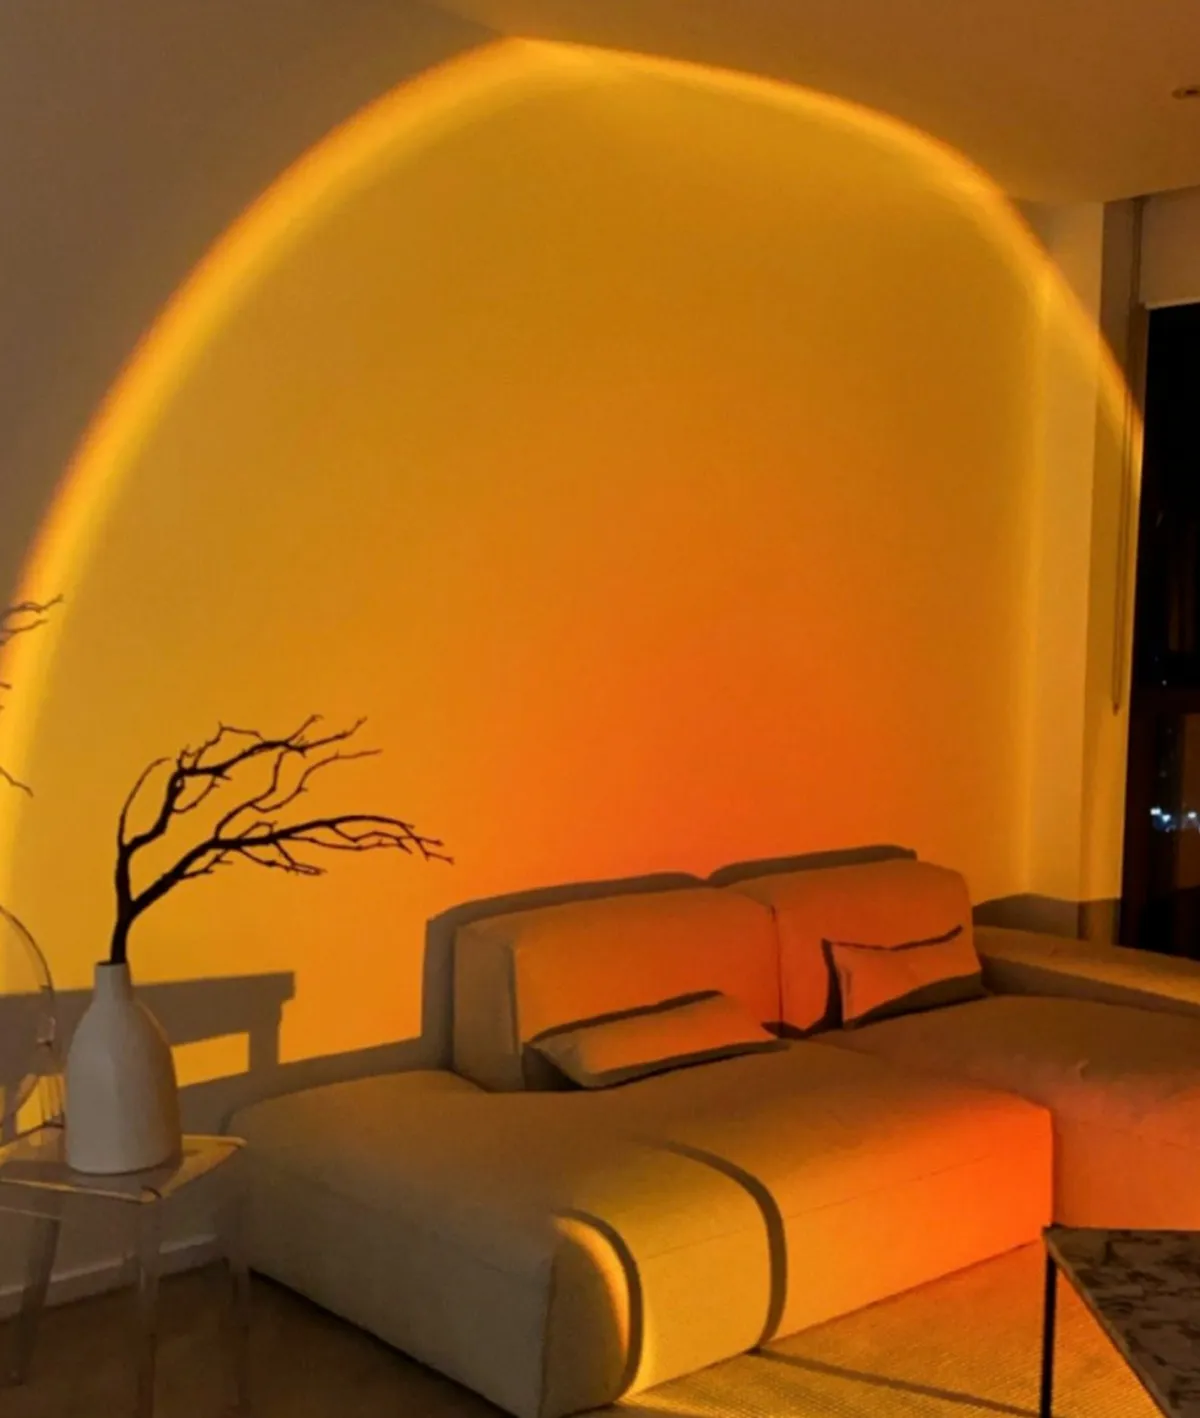 Sunset lamp lighting up a living room with a orange golden glow against a white corner sofa